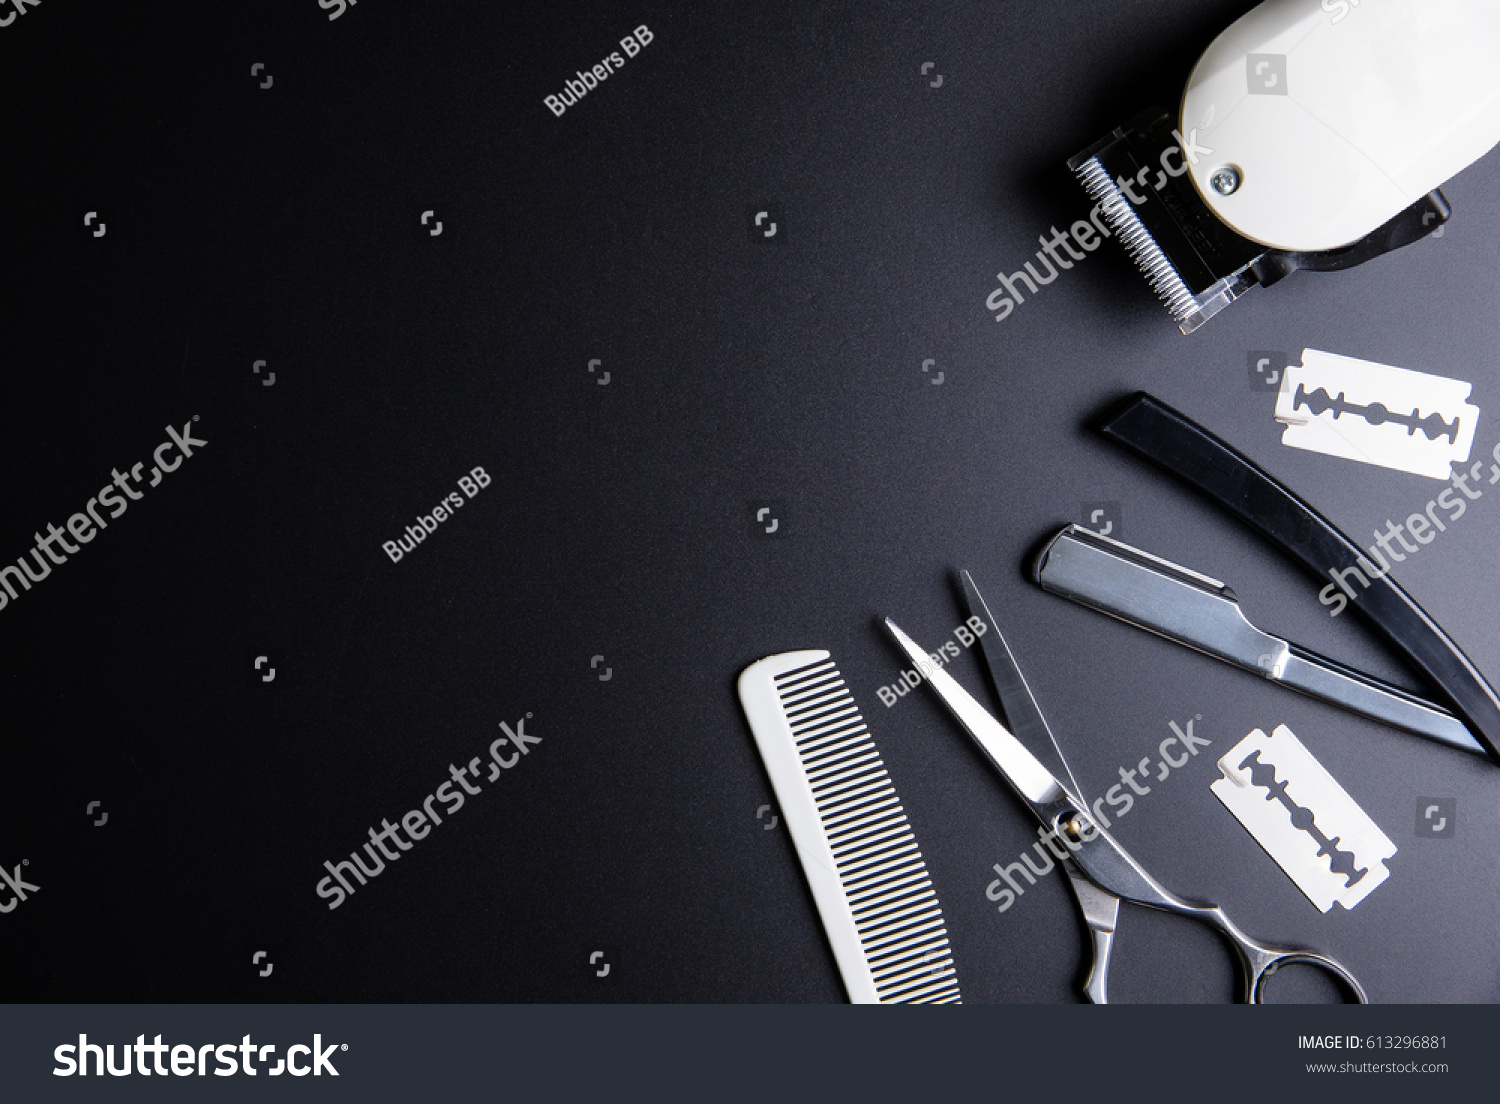 Razor, Stylish Professional Barber Scissors, White comb and White electric clippers on black background. Hairdresser salon concept, Hairdressing Set. Haircut accessories. Copy space image, flat lay #613296881